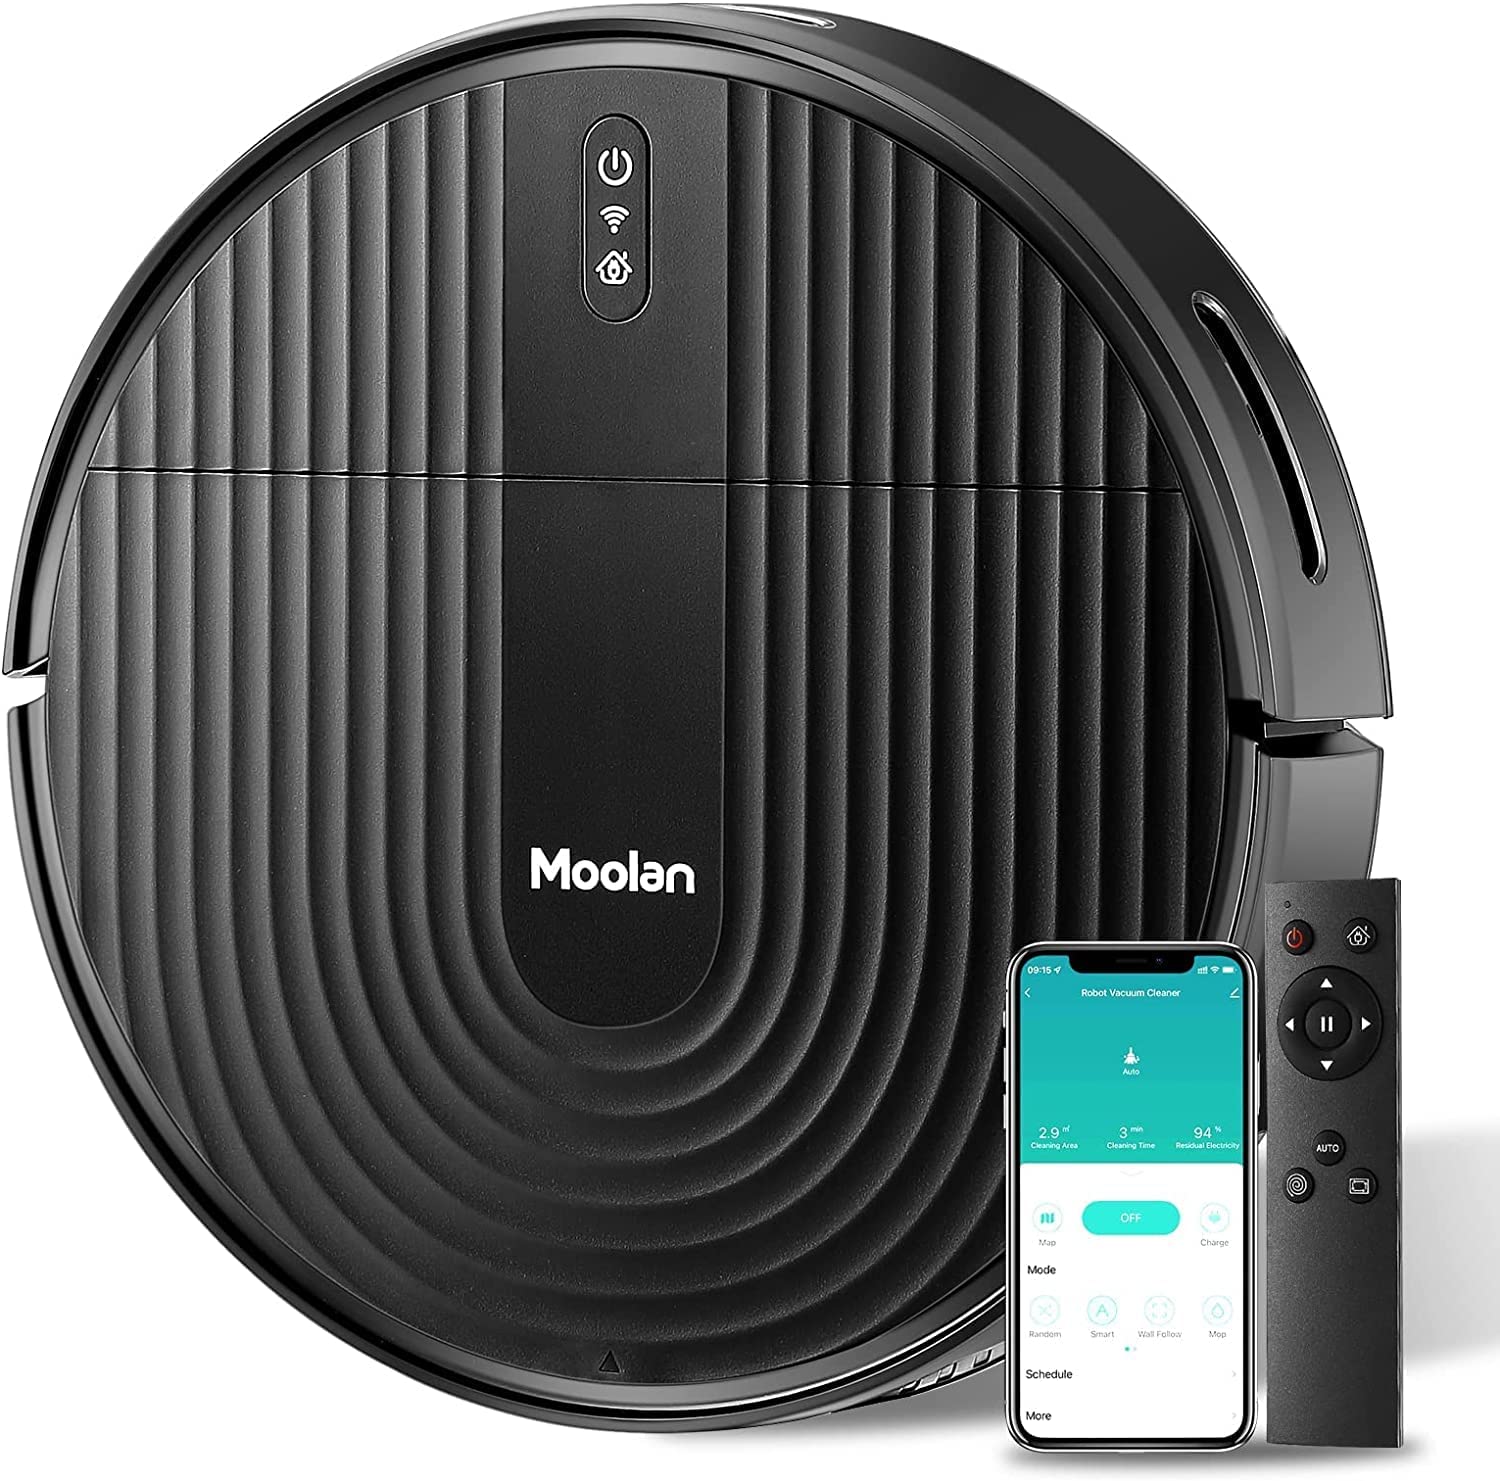 Read more about the article Moolan Robot Vacuum Review